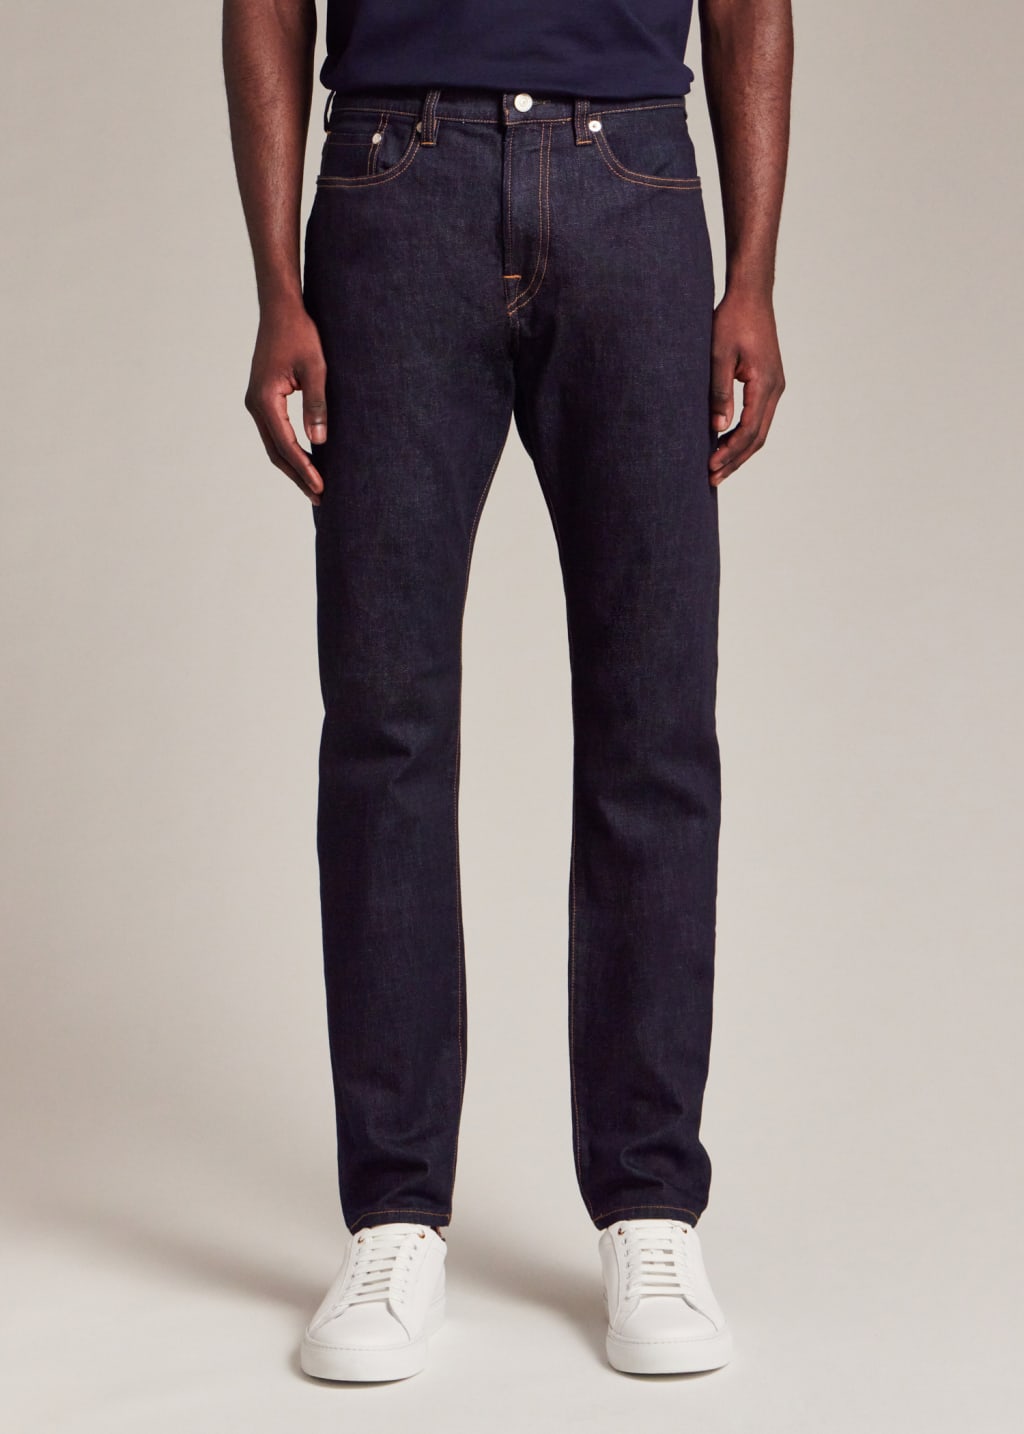 Model View - Tapered-Fit Indigo-Rinse 'Crosshatch Stretch' Jeans Paul Smith